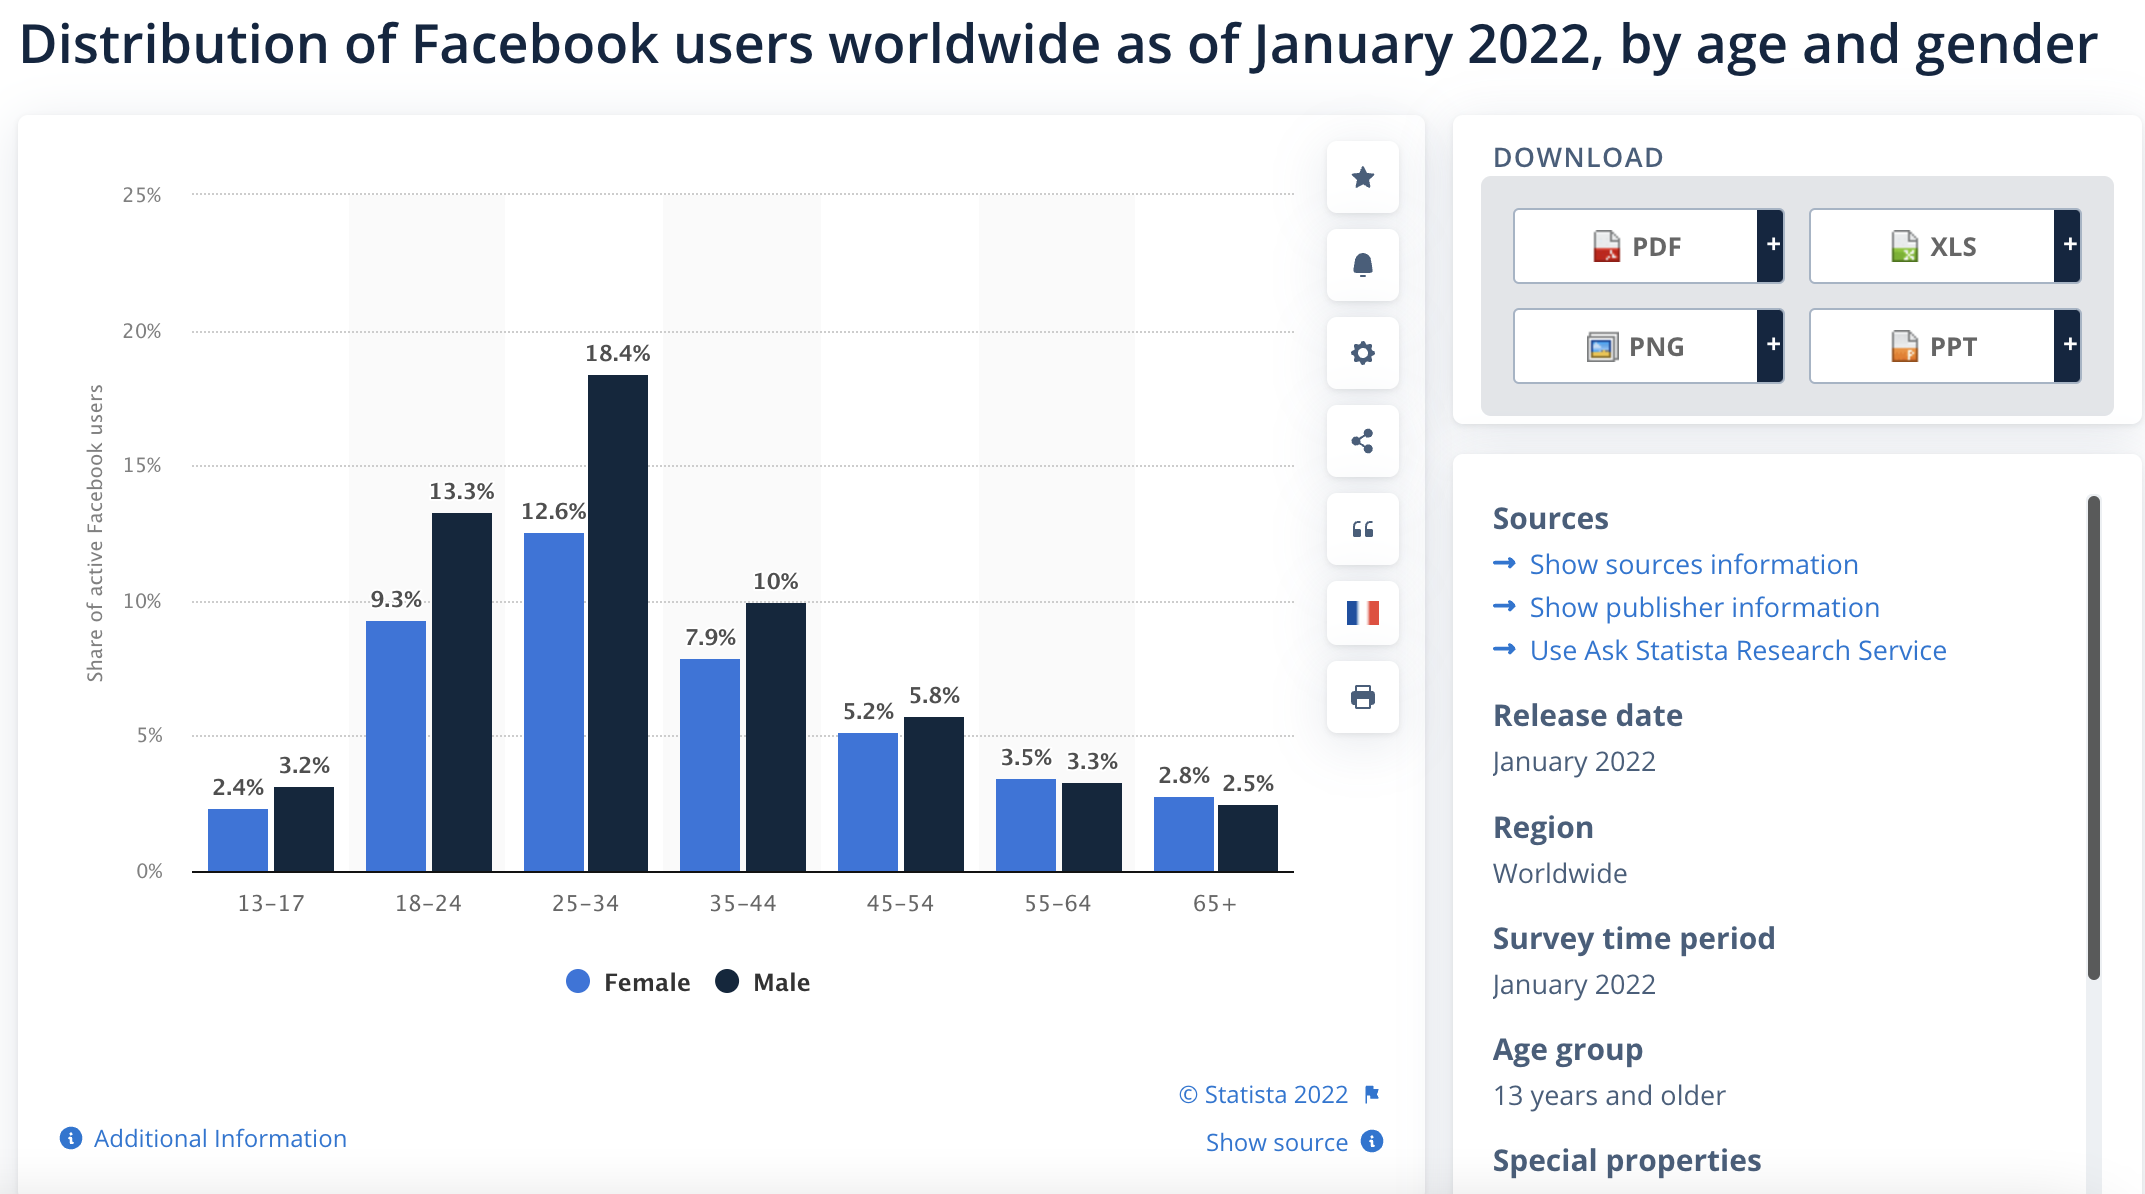 This image shows Facebook users worldwide by age and gender. 